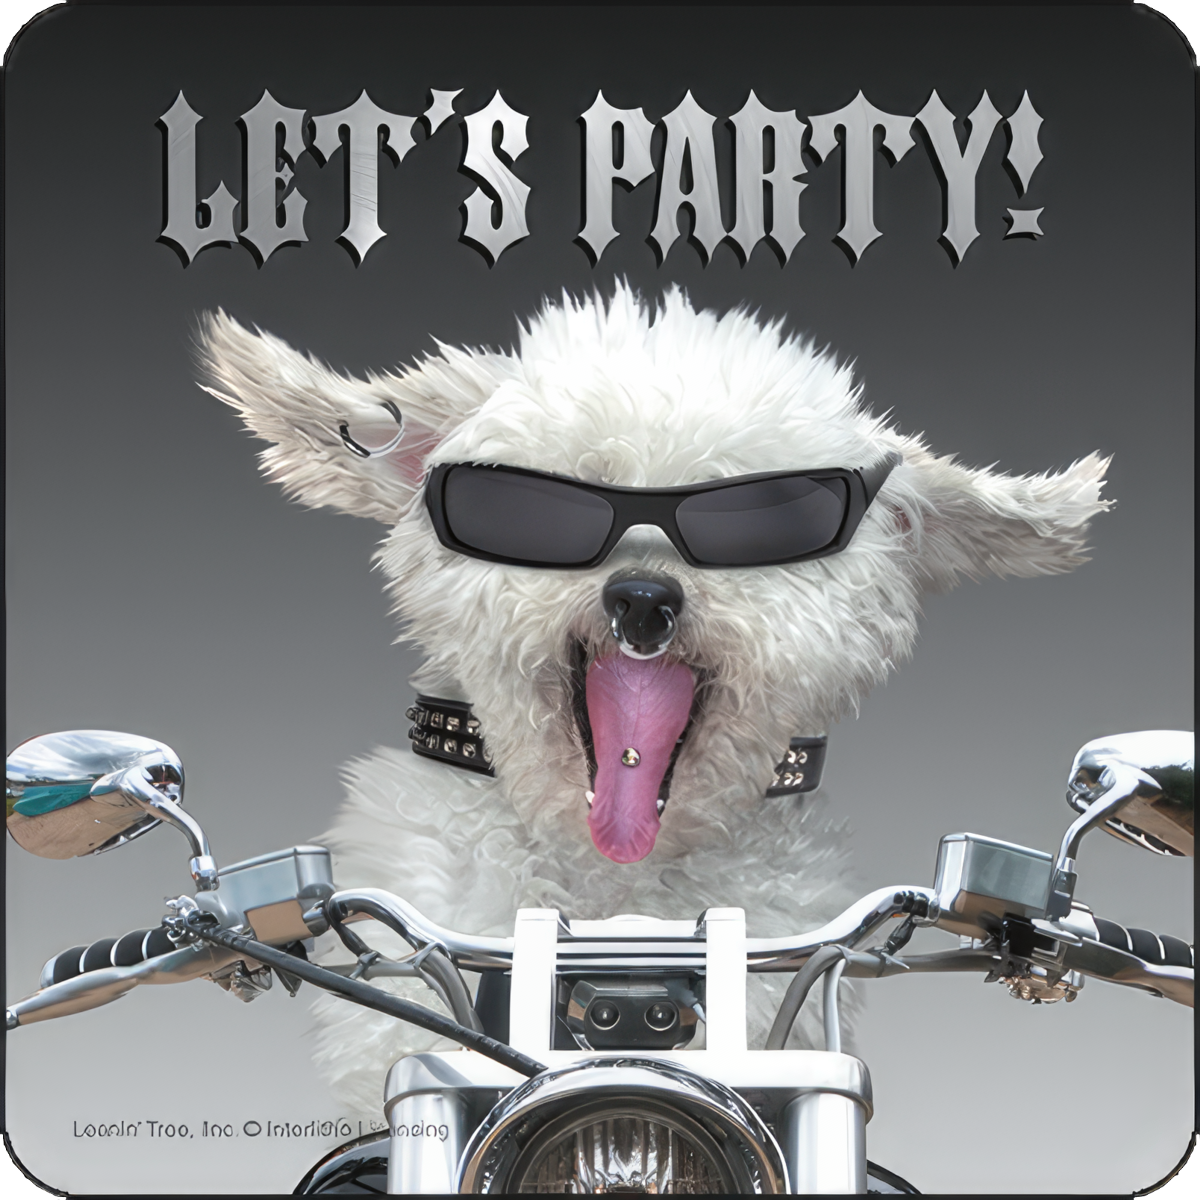 a dog with sunglasses and tongue sticking out rides a motorcycle